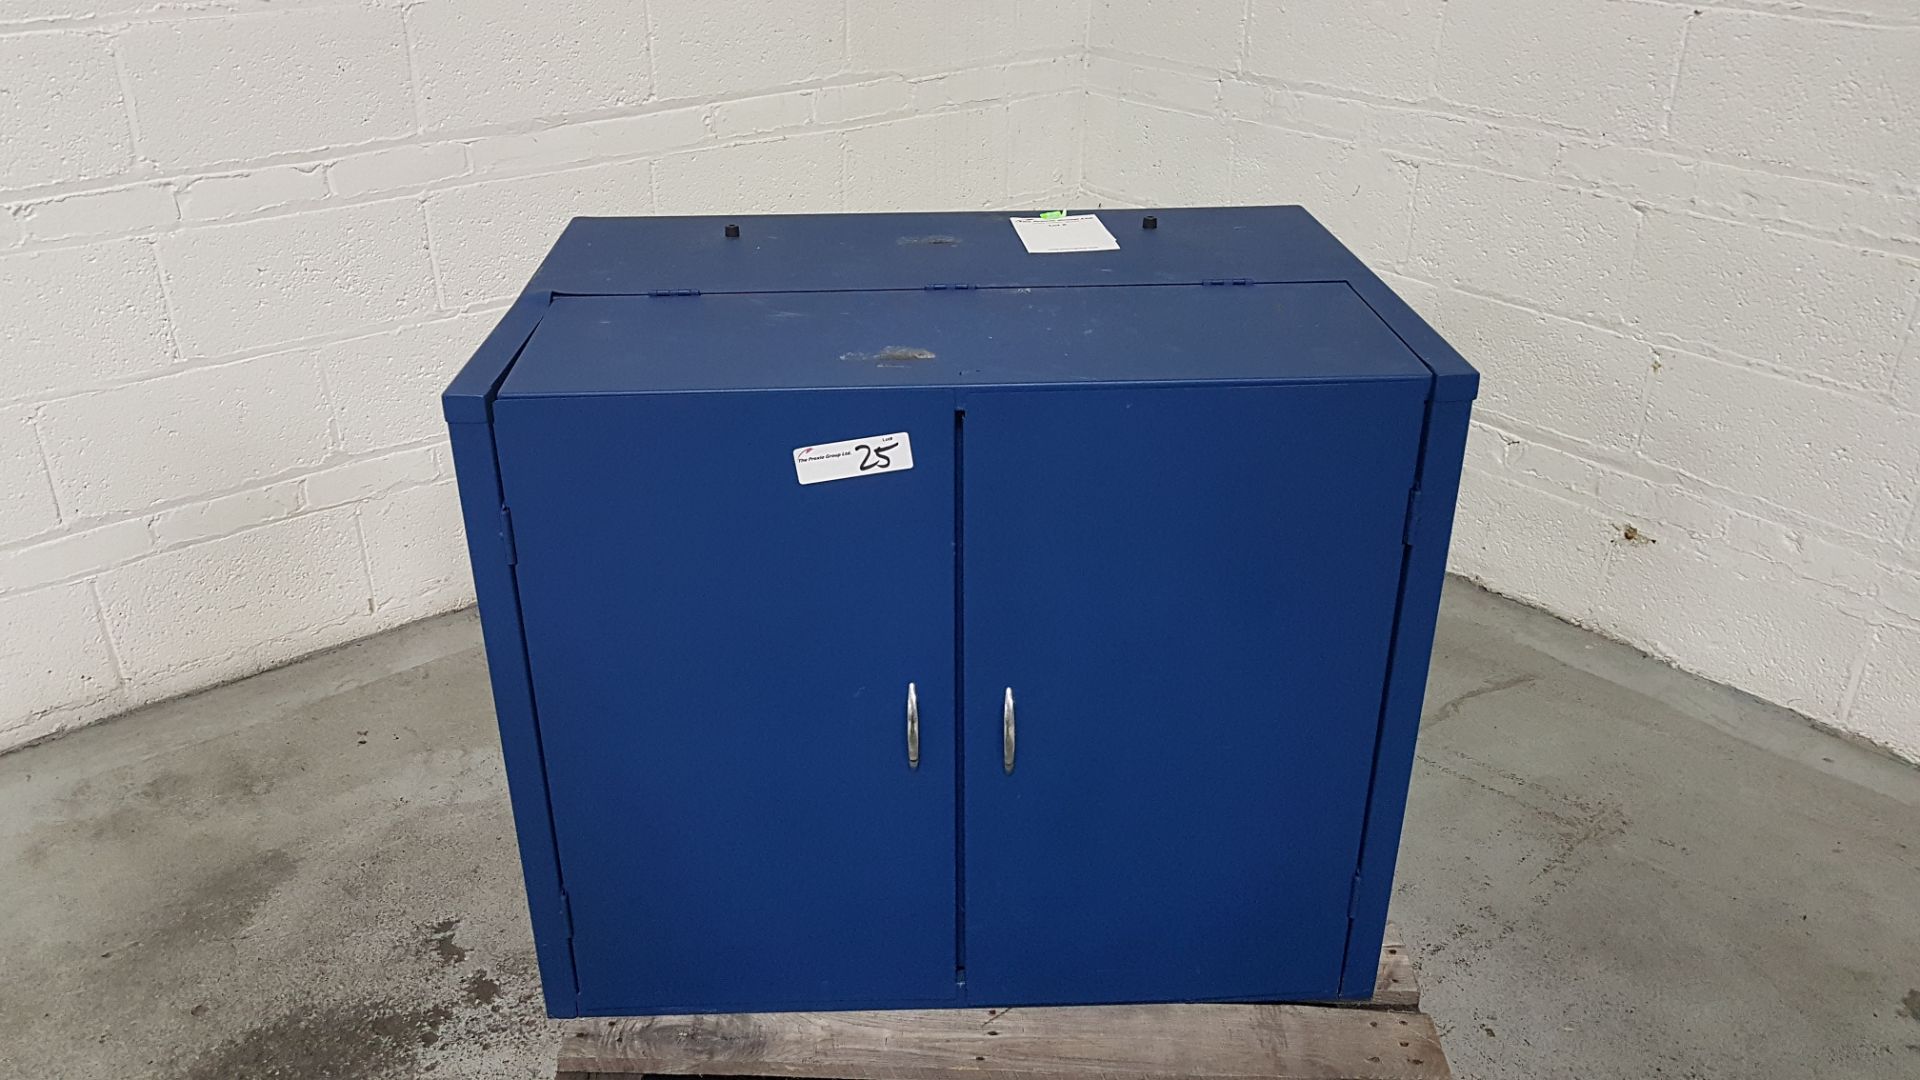 Insulated cabinet, 32"W x 23" D x 27" H.